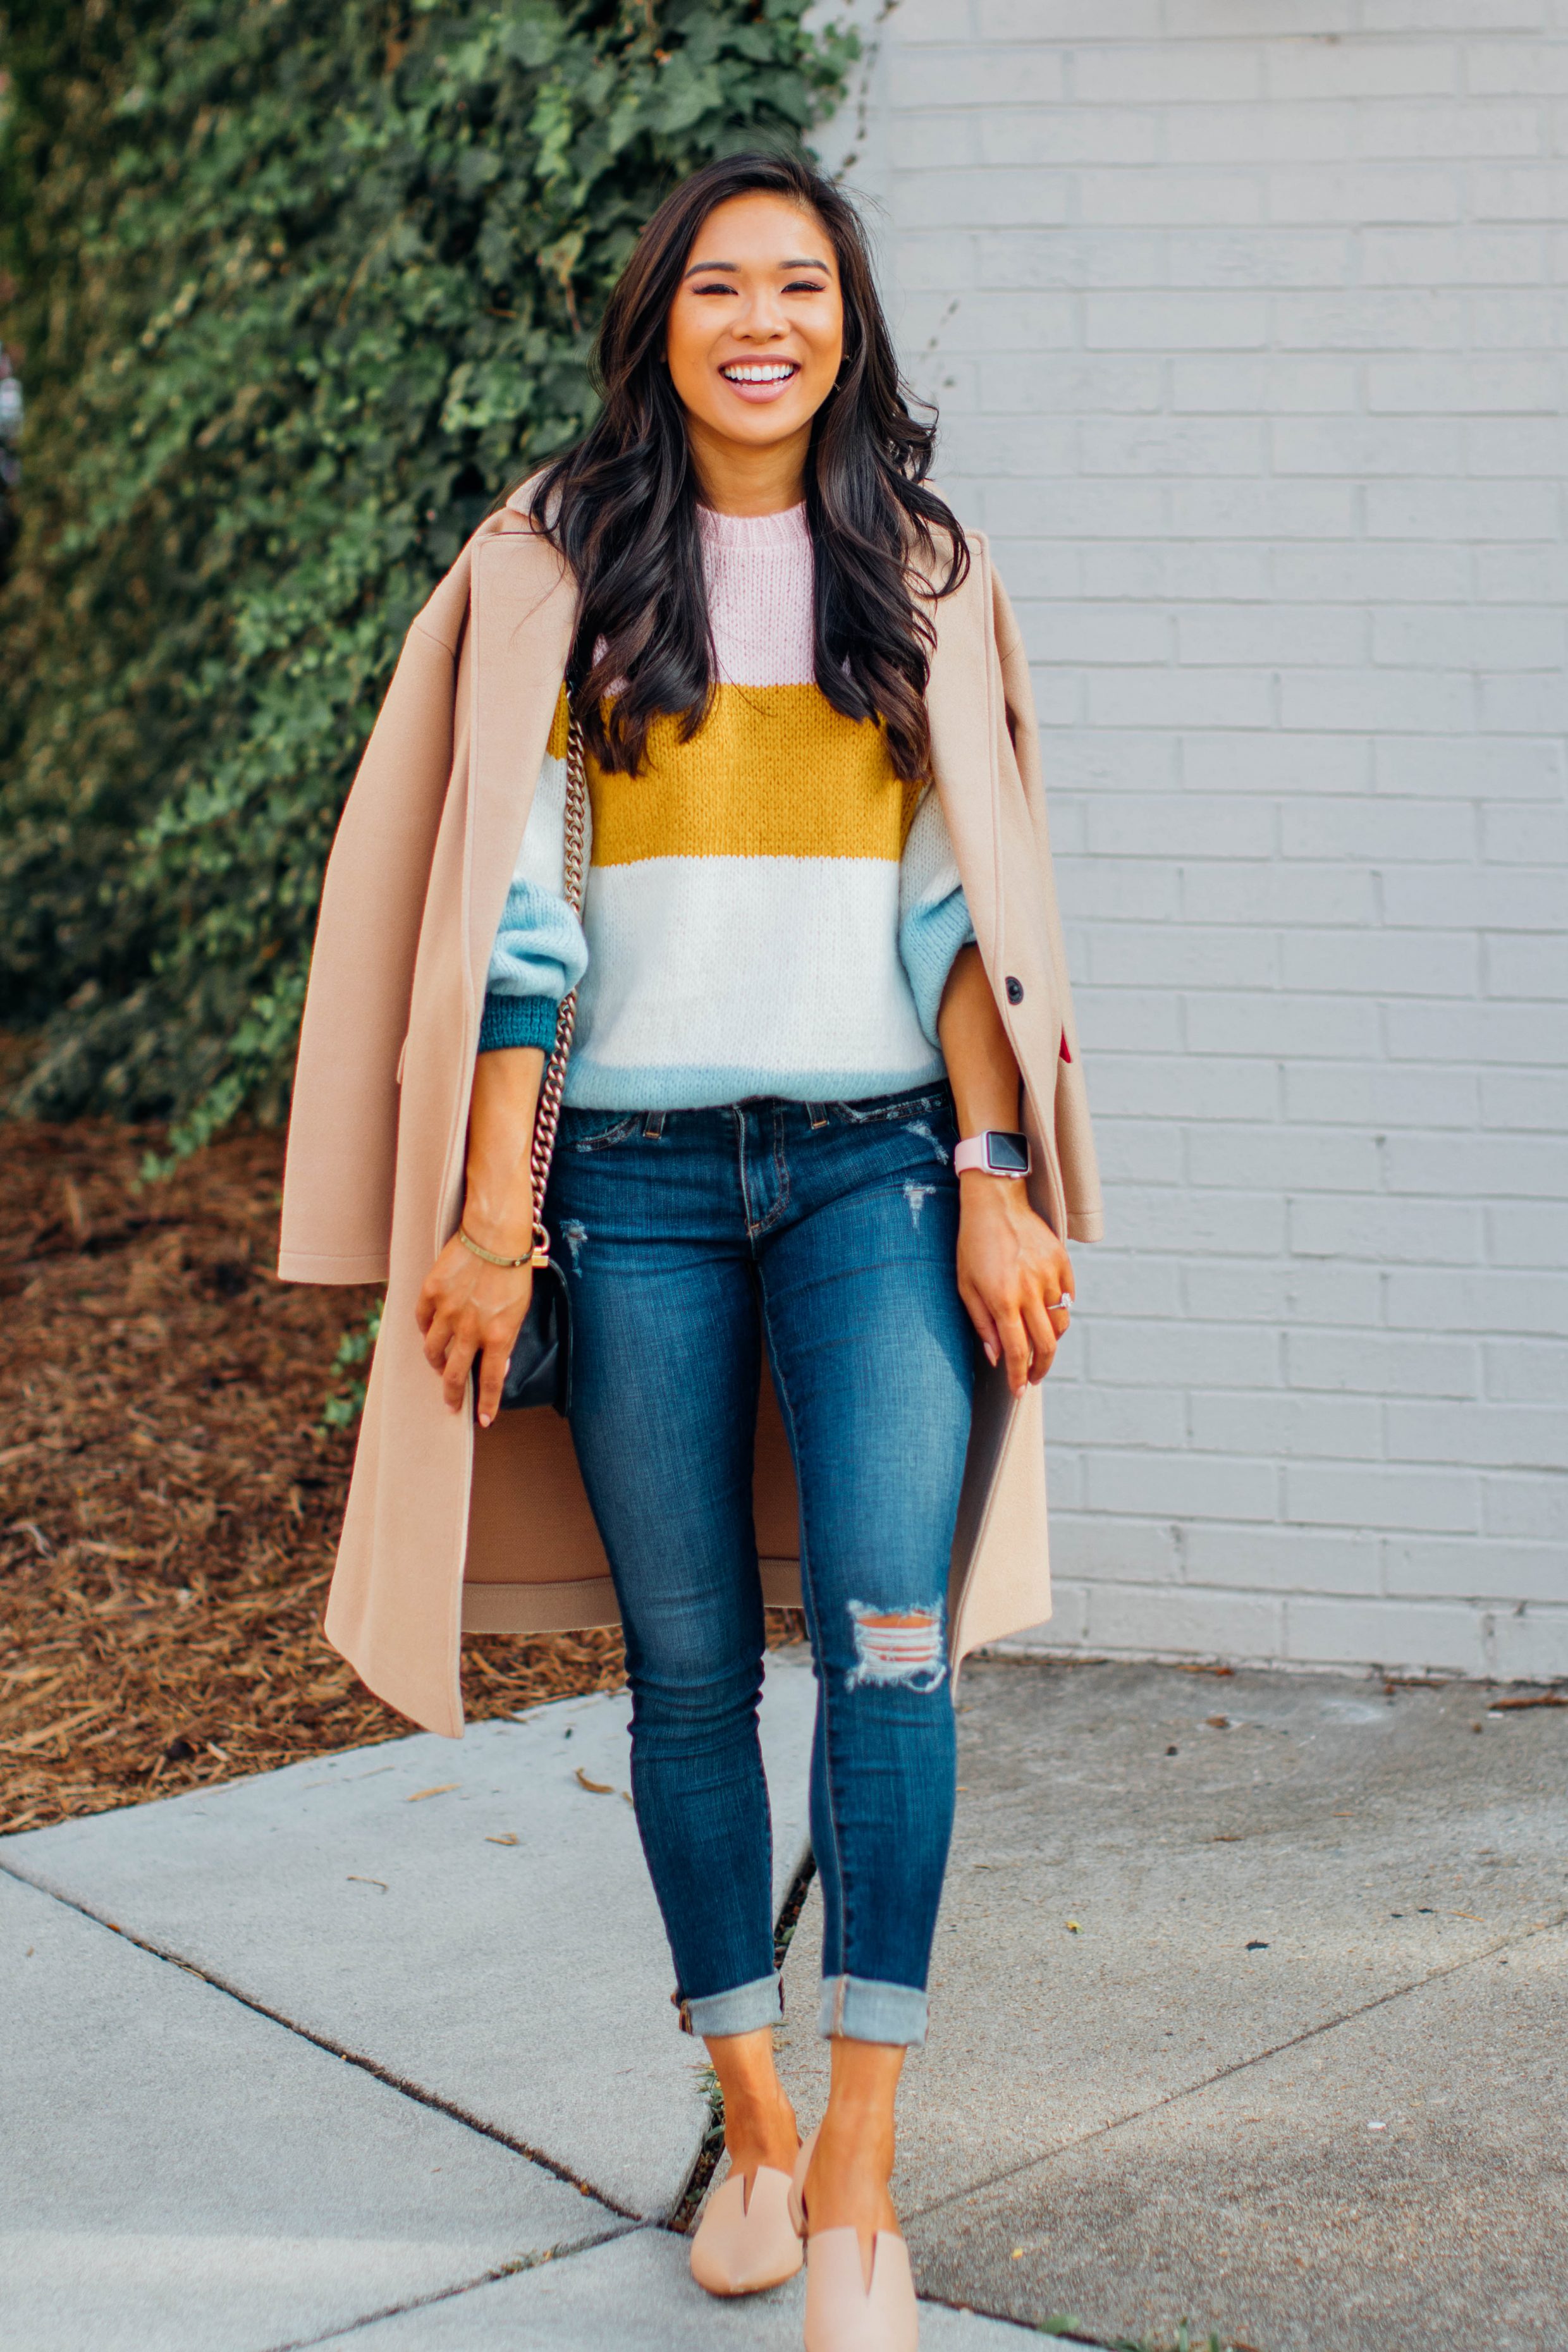 Blogger Hoang-Kim wears a striped transition sweater for fall